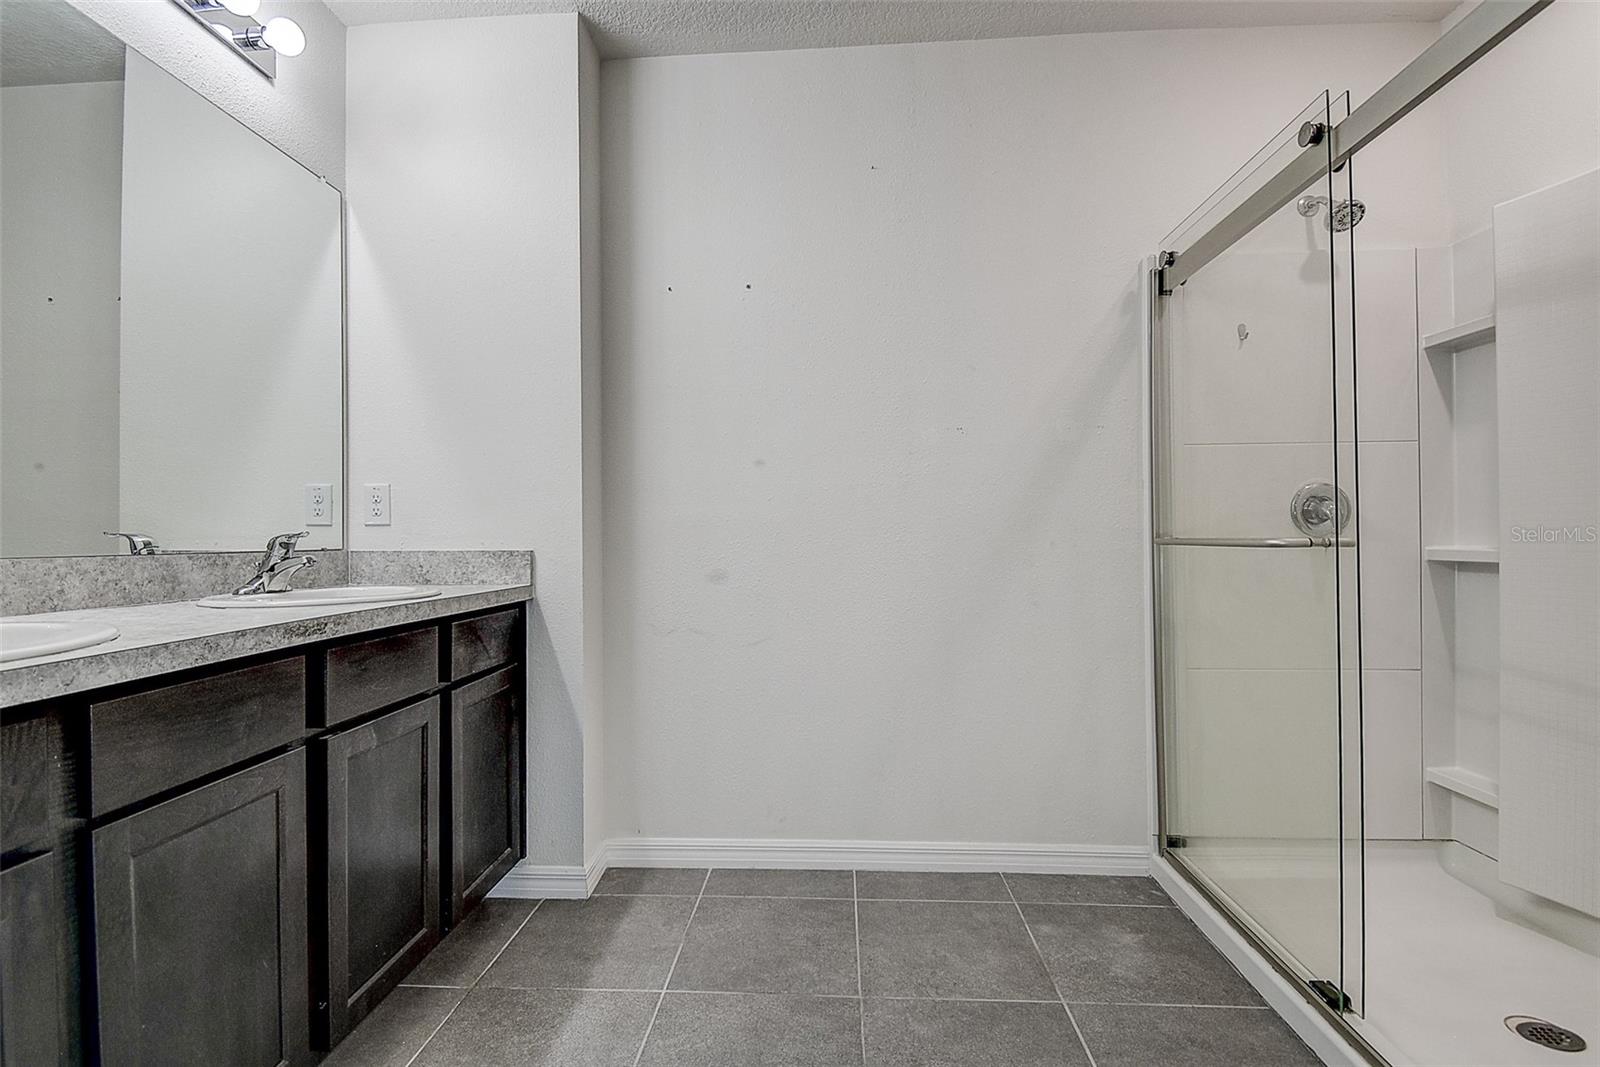 Primary bathroom with dual sinks, upgraded glass doors on walk-in shower.